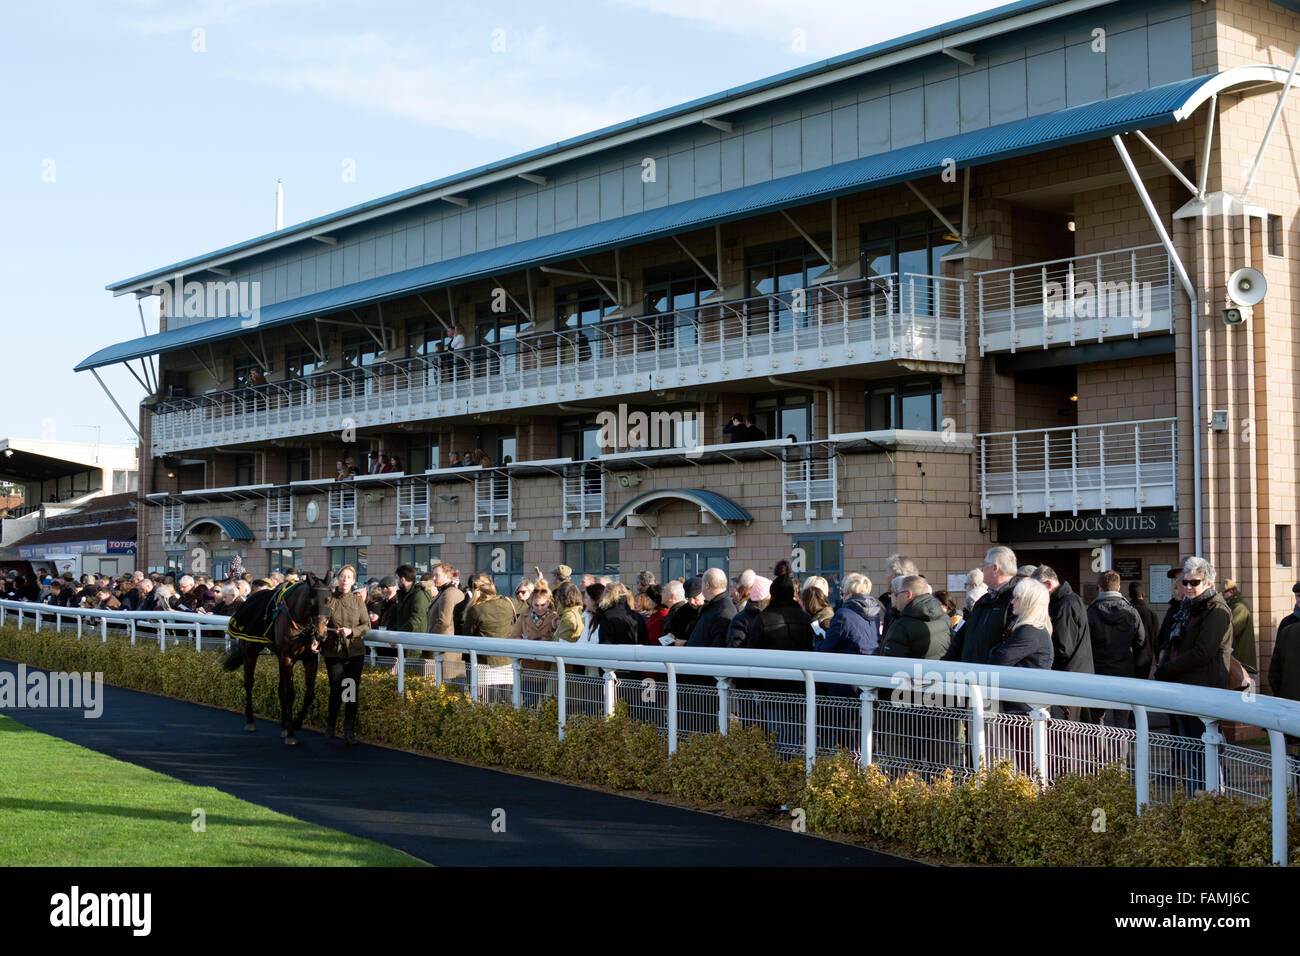 Grandstand and Parade Ring at Warwick Racecourse, UK Stock Photo